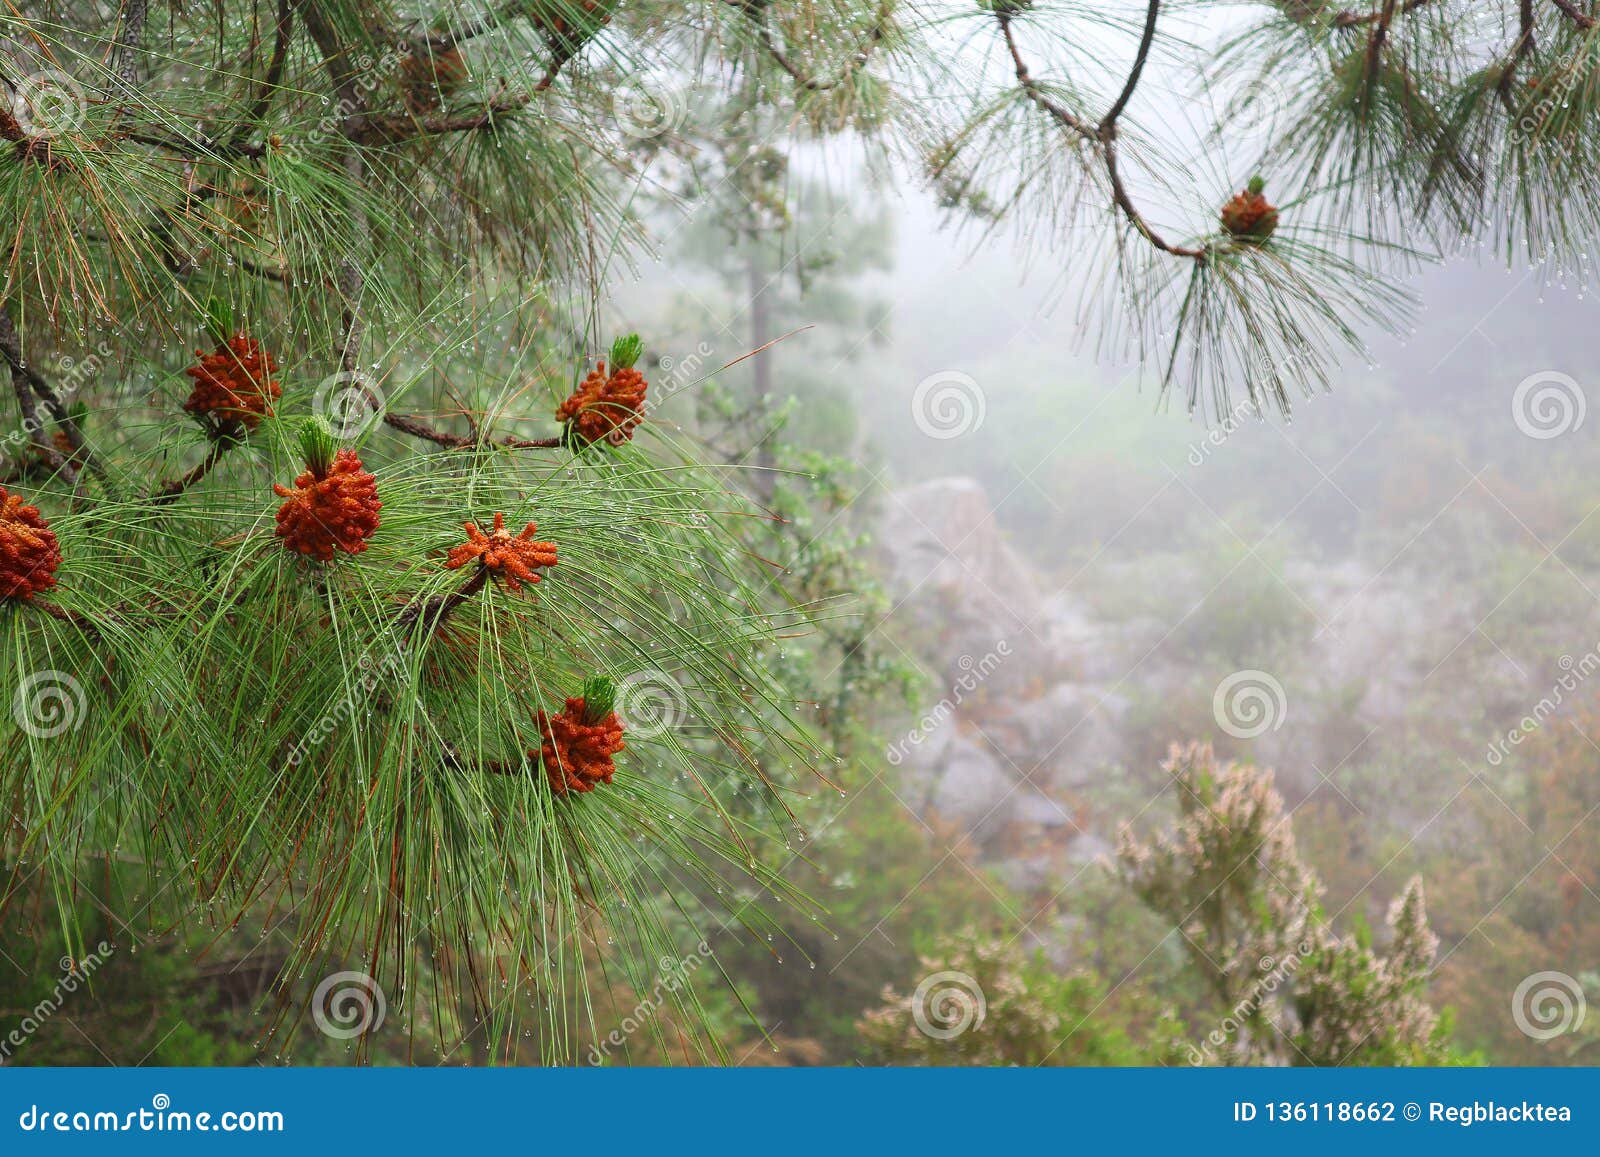 Pine Tree Branches with Drops of Dew in Foggy Weather. Stock Photo